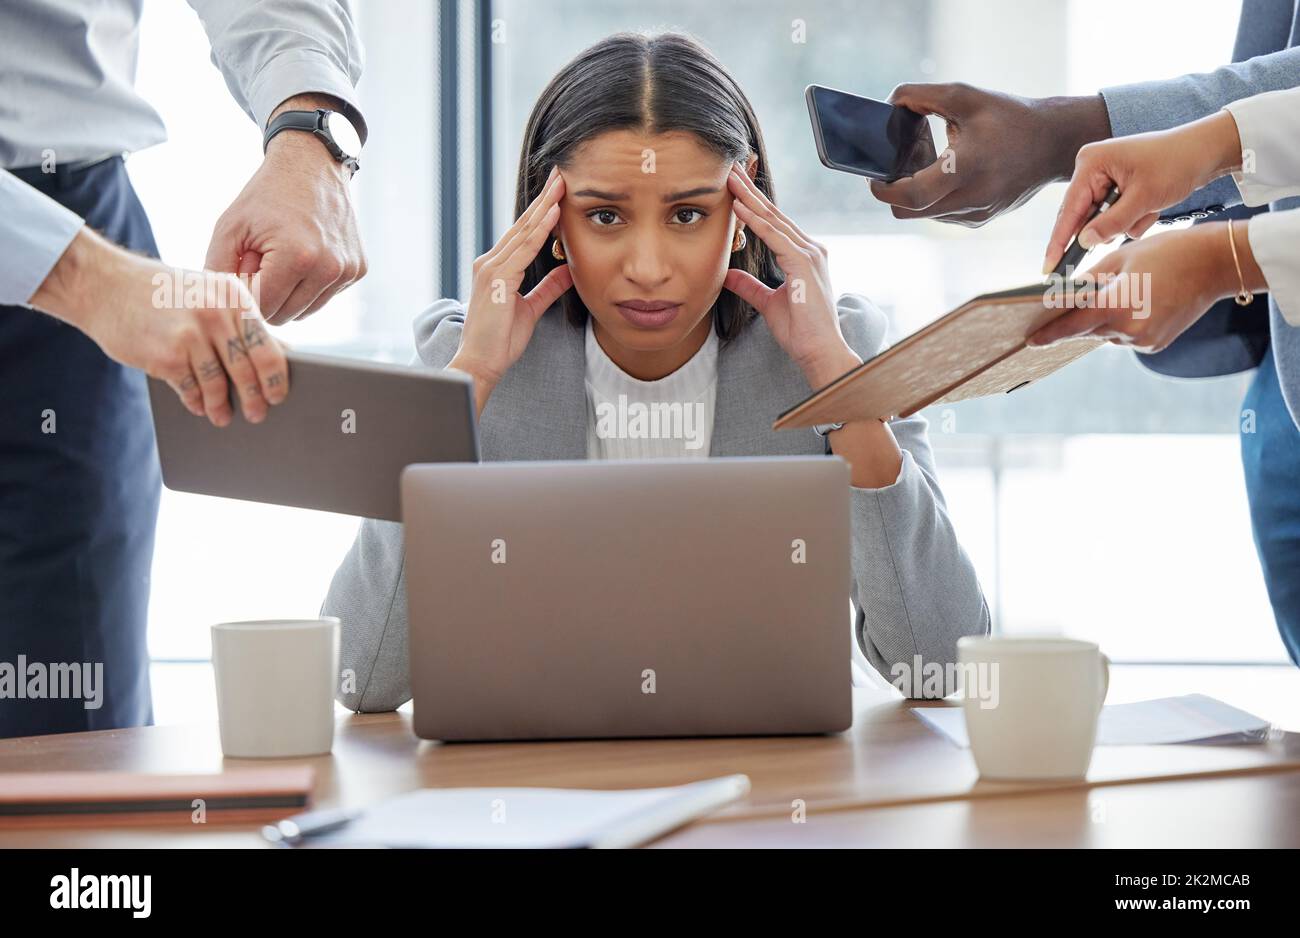 This is too much for me. Shot of a young businesswoman feeling stressed out in a demanding office environment at work. Stock Photo